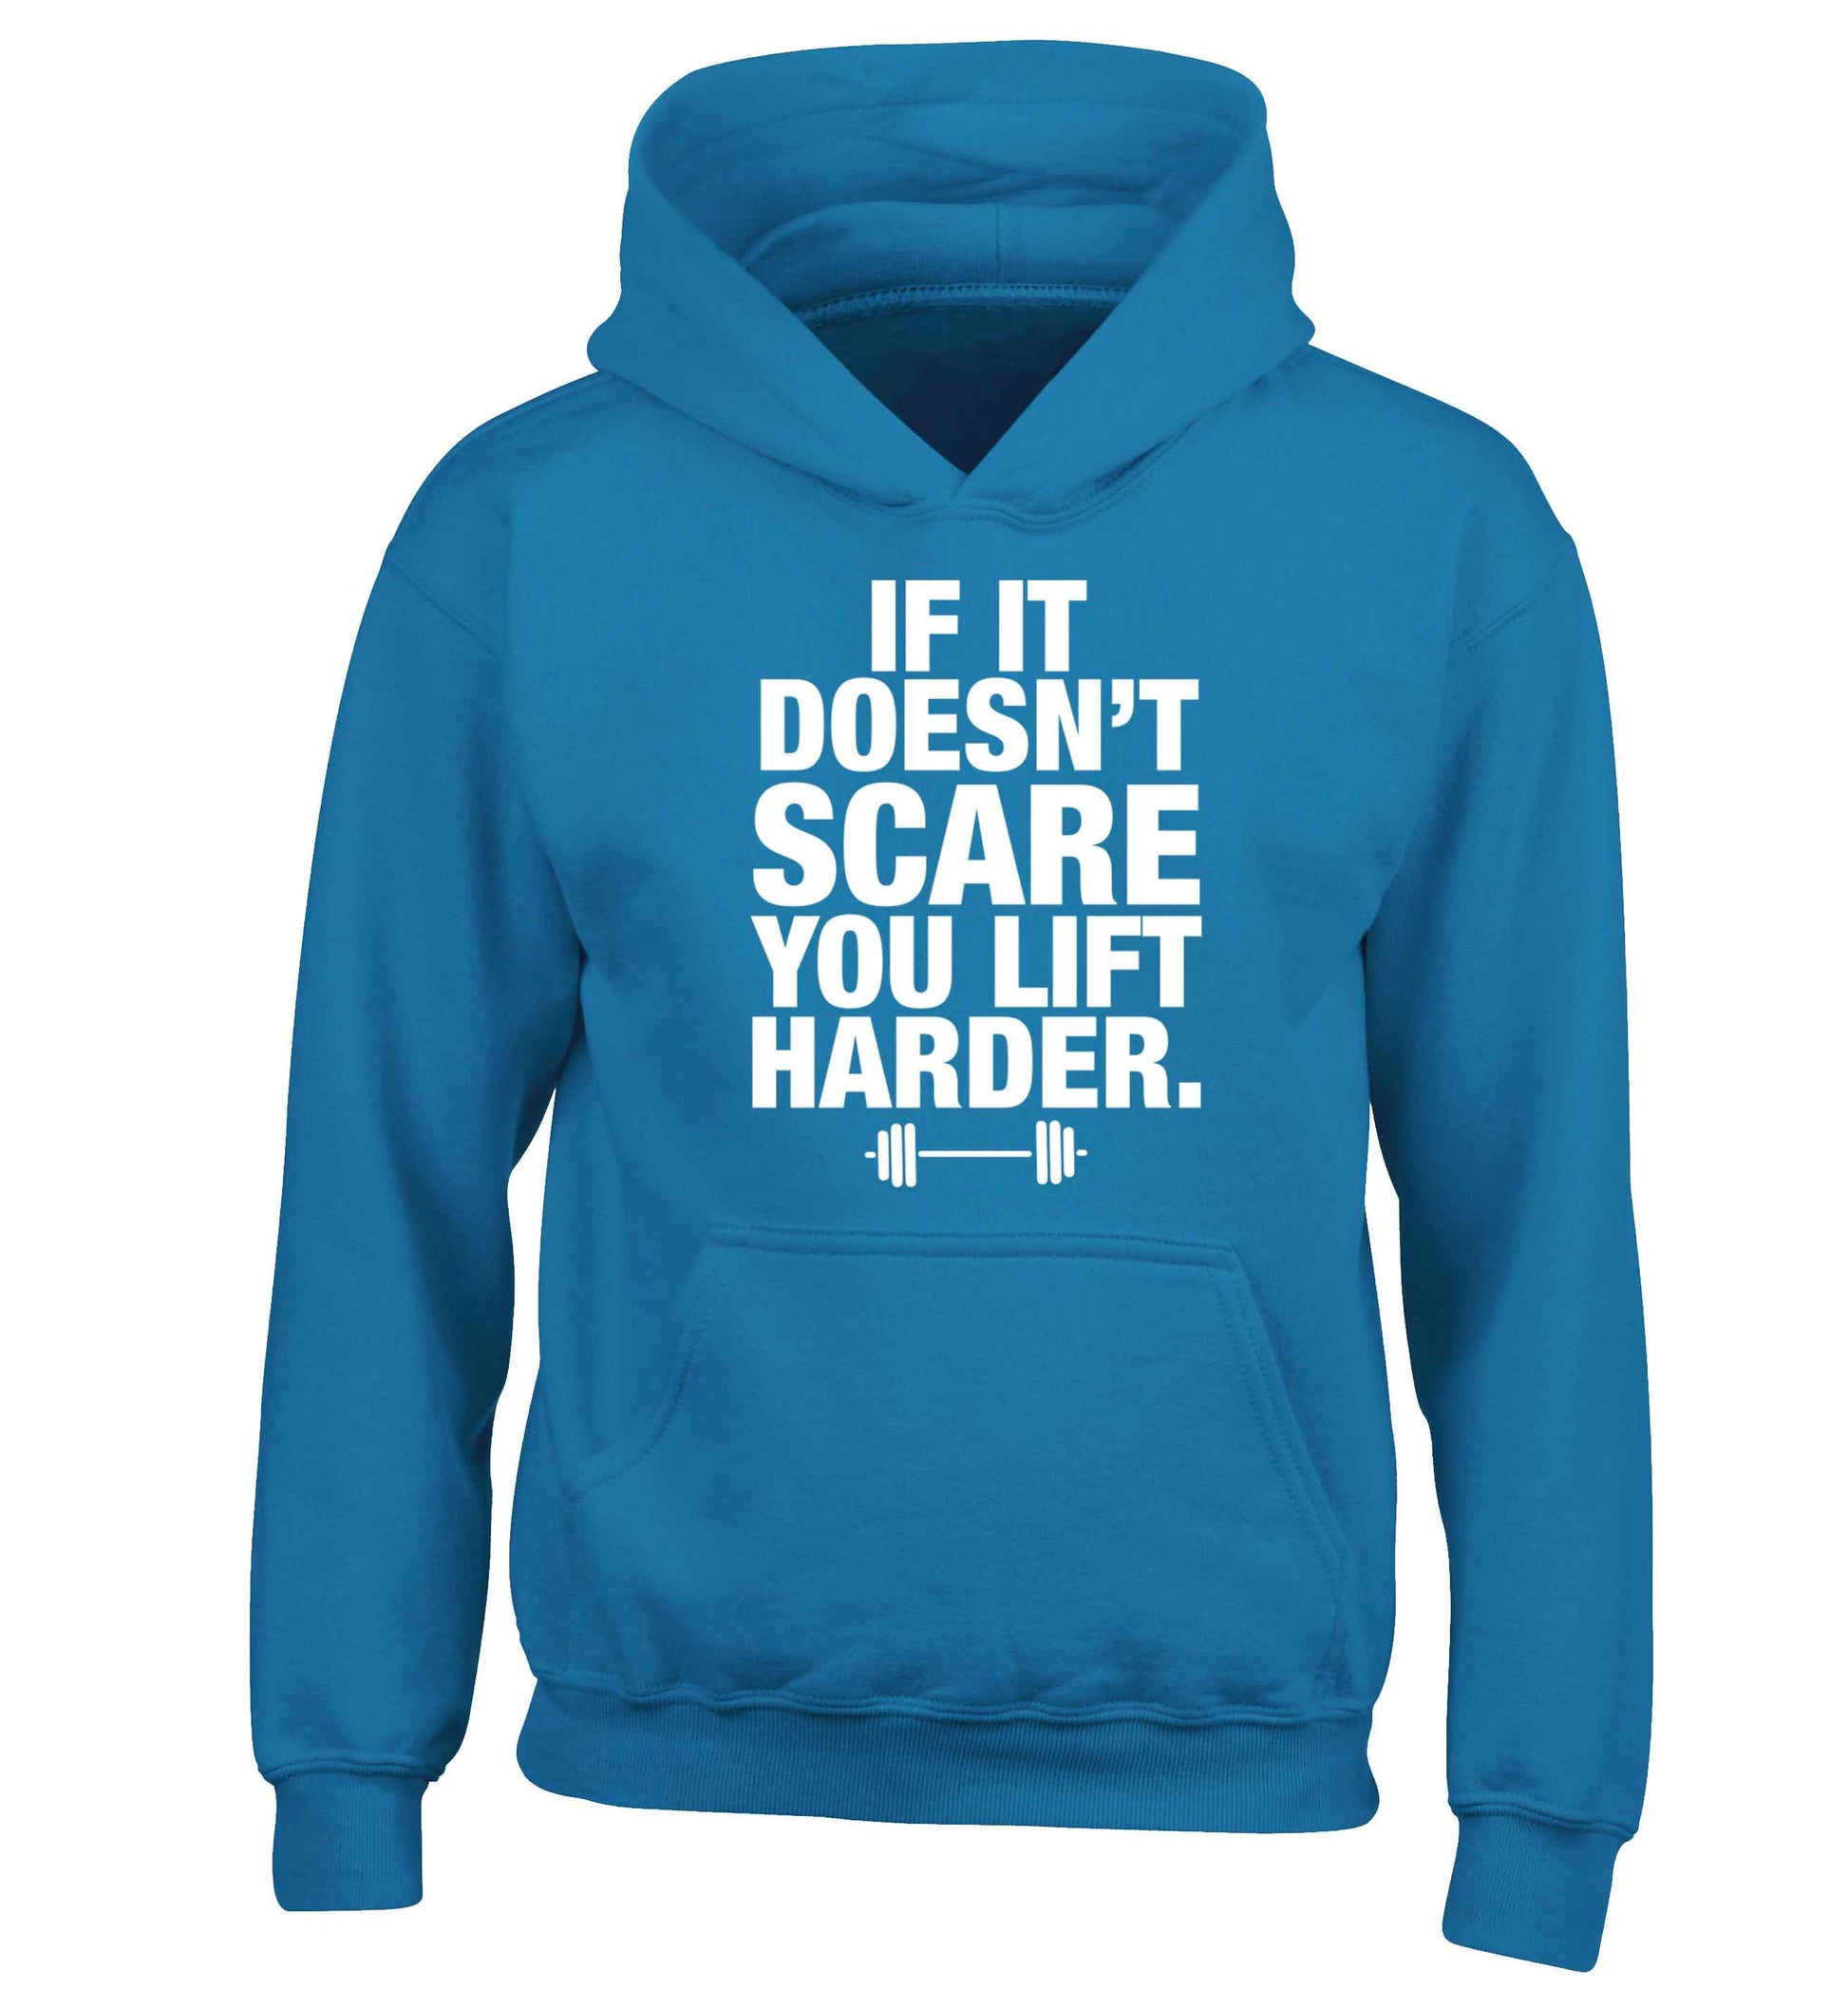 If it doesnt' scare you lift harder children's blue hoodie 12-13 Years